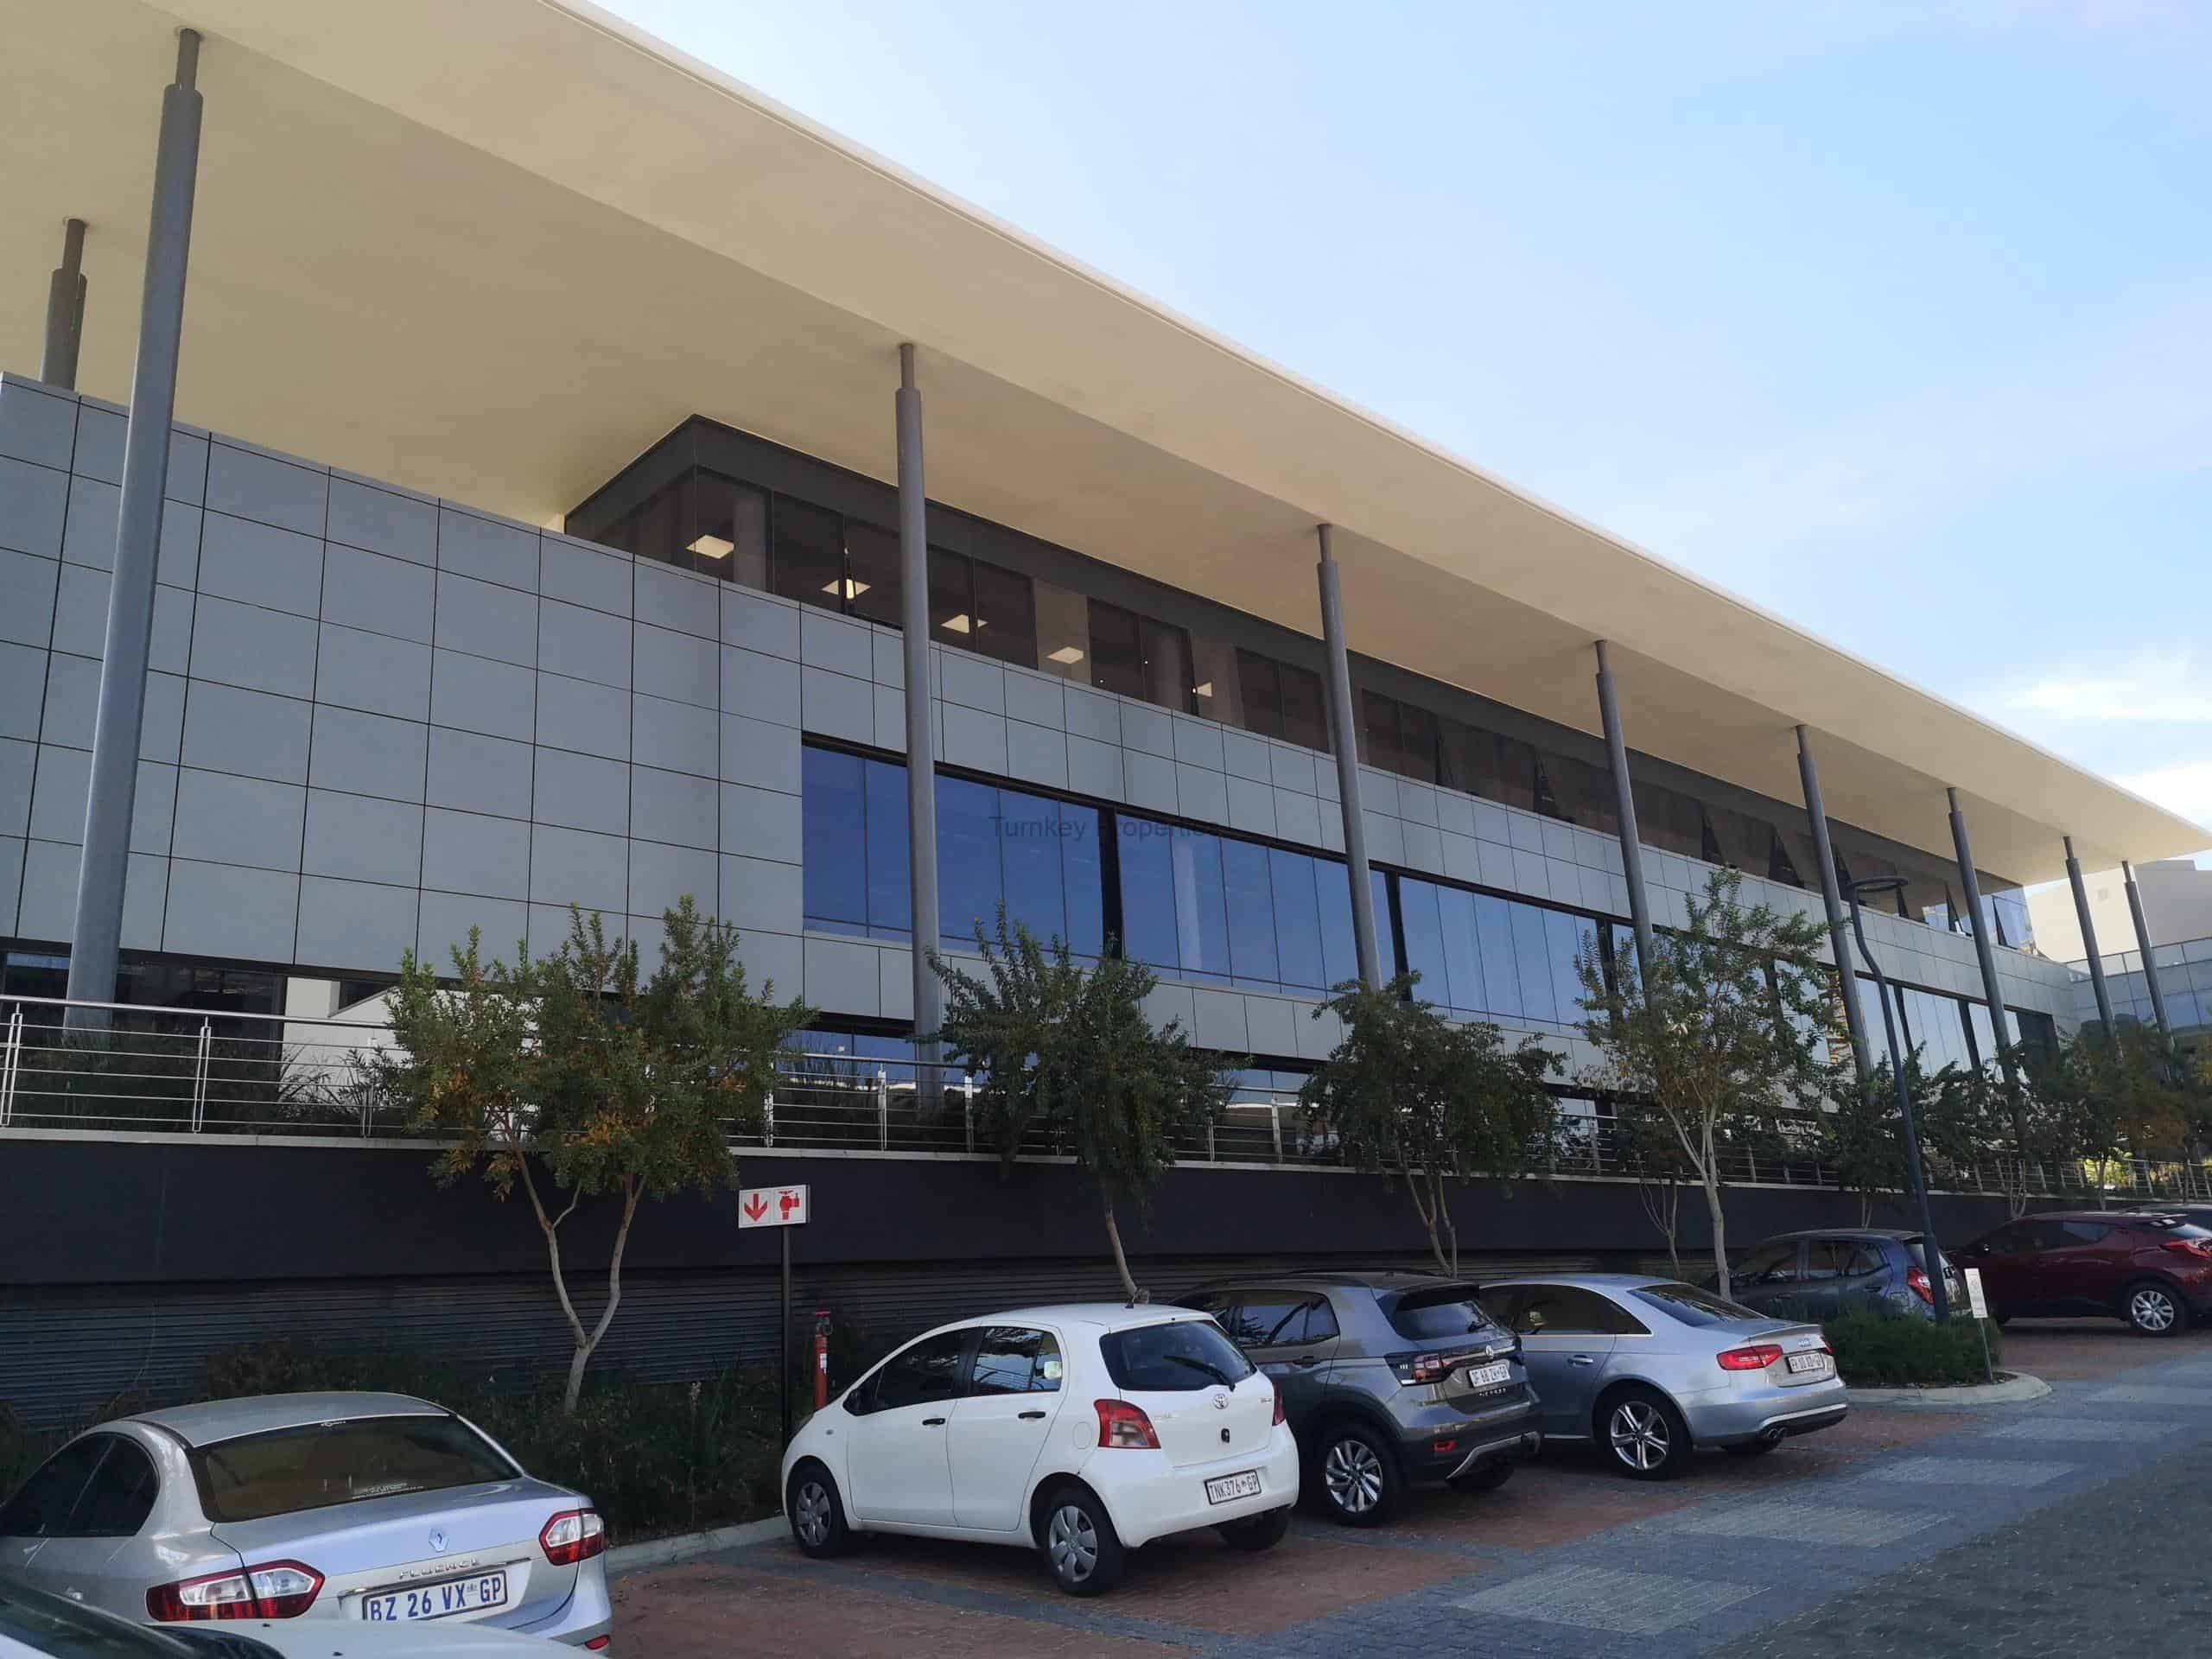 286m² office to let midrand Corporate Campus (Reduced rental)